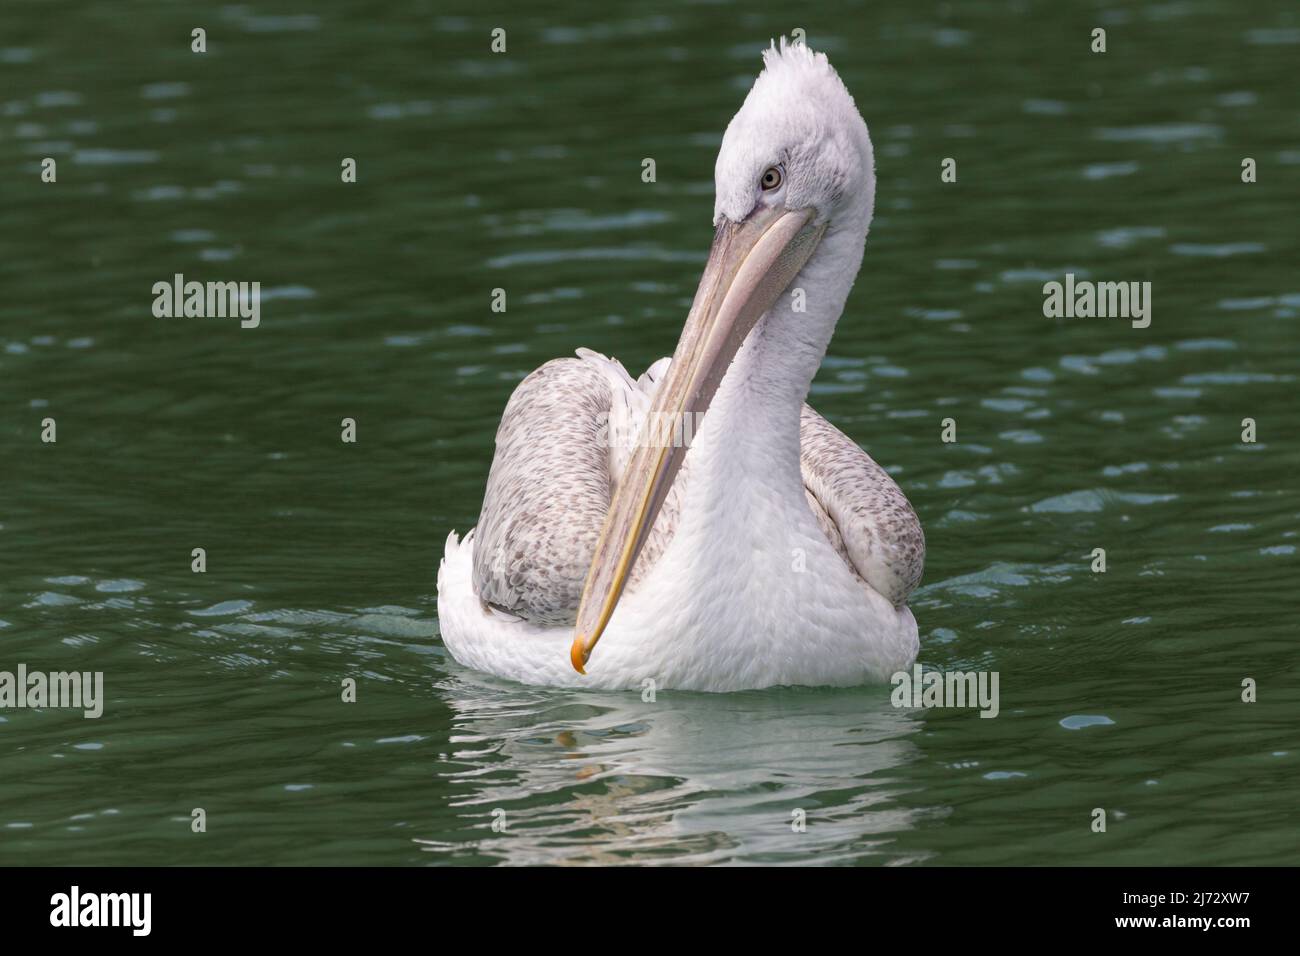 Dalmatian pelican (Pelecanus crispus) swimming at arundel wwt uk has large bill and throat pouch to catch fish, curly nape feathers late spring uk Stock Photo